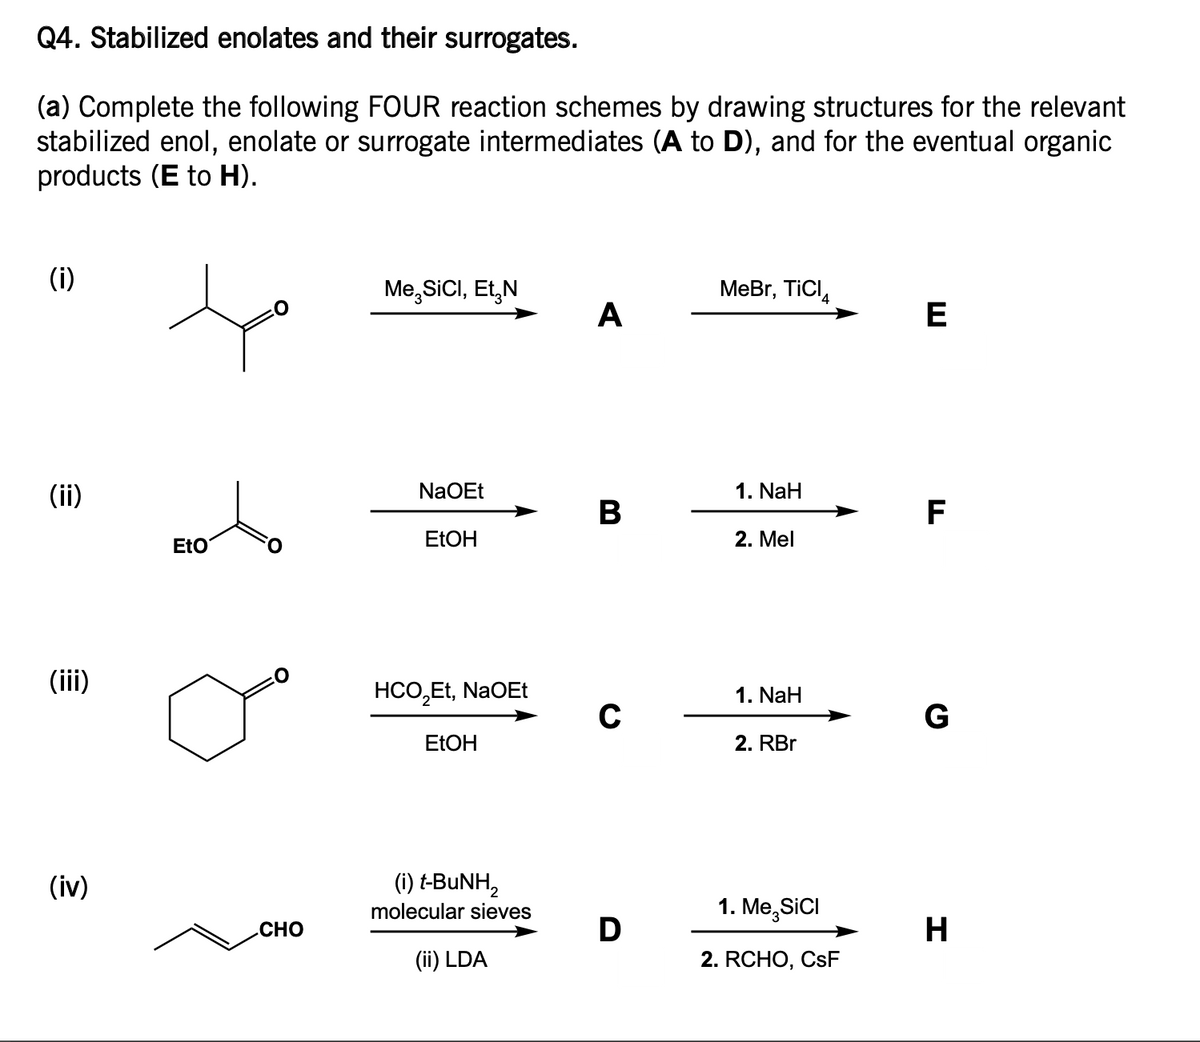 Q4. Stabilized enolates and their surrogates.
(a) Complete the following FOUR reaction schemes by drawing structures for the relevant
stabilized enol, enolate or surrogate intermediates (A to D), and for the eventual organic
products (E to H).
(i)
(ii)
(iii)
(iv)
EtO
CHO
Me,SICI, Et N
NaOEt
EtOH
HCO₂Et, NaOEt
EtOH
(i) t-BuNH,
molecular sieves
(ii) LDA
A
B
C
D
MeBr, TICI
1. NaH
2. Mel
1. NaH
2. RBr
1. Me,SICI
2. RCHO, CsF
E
F
G
H